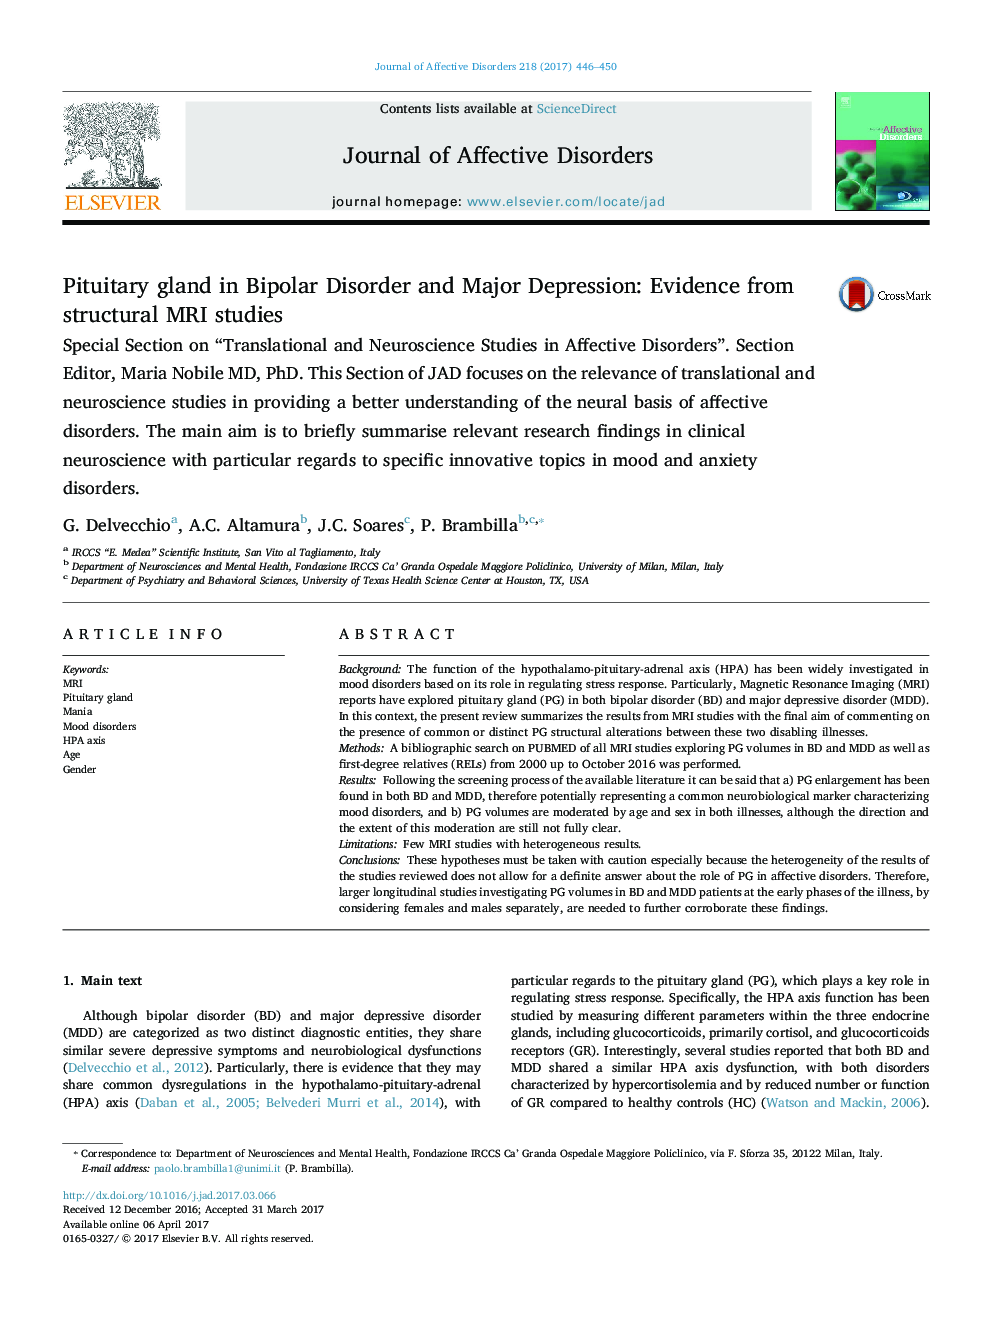 Pituitary gland in Bipolar Disorder and Major Depression: Evidence from structural MRI studies: Special Section on “Translational and Neuroscience Studies in Affective Disorders”. Section Editor, Maria Nobile MD, PhD. This Section of JAD focuses on th